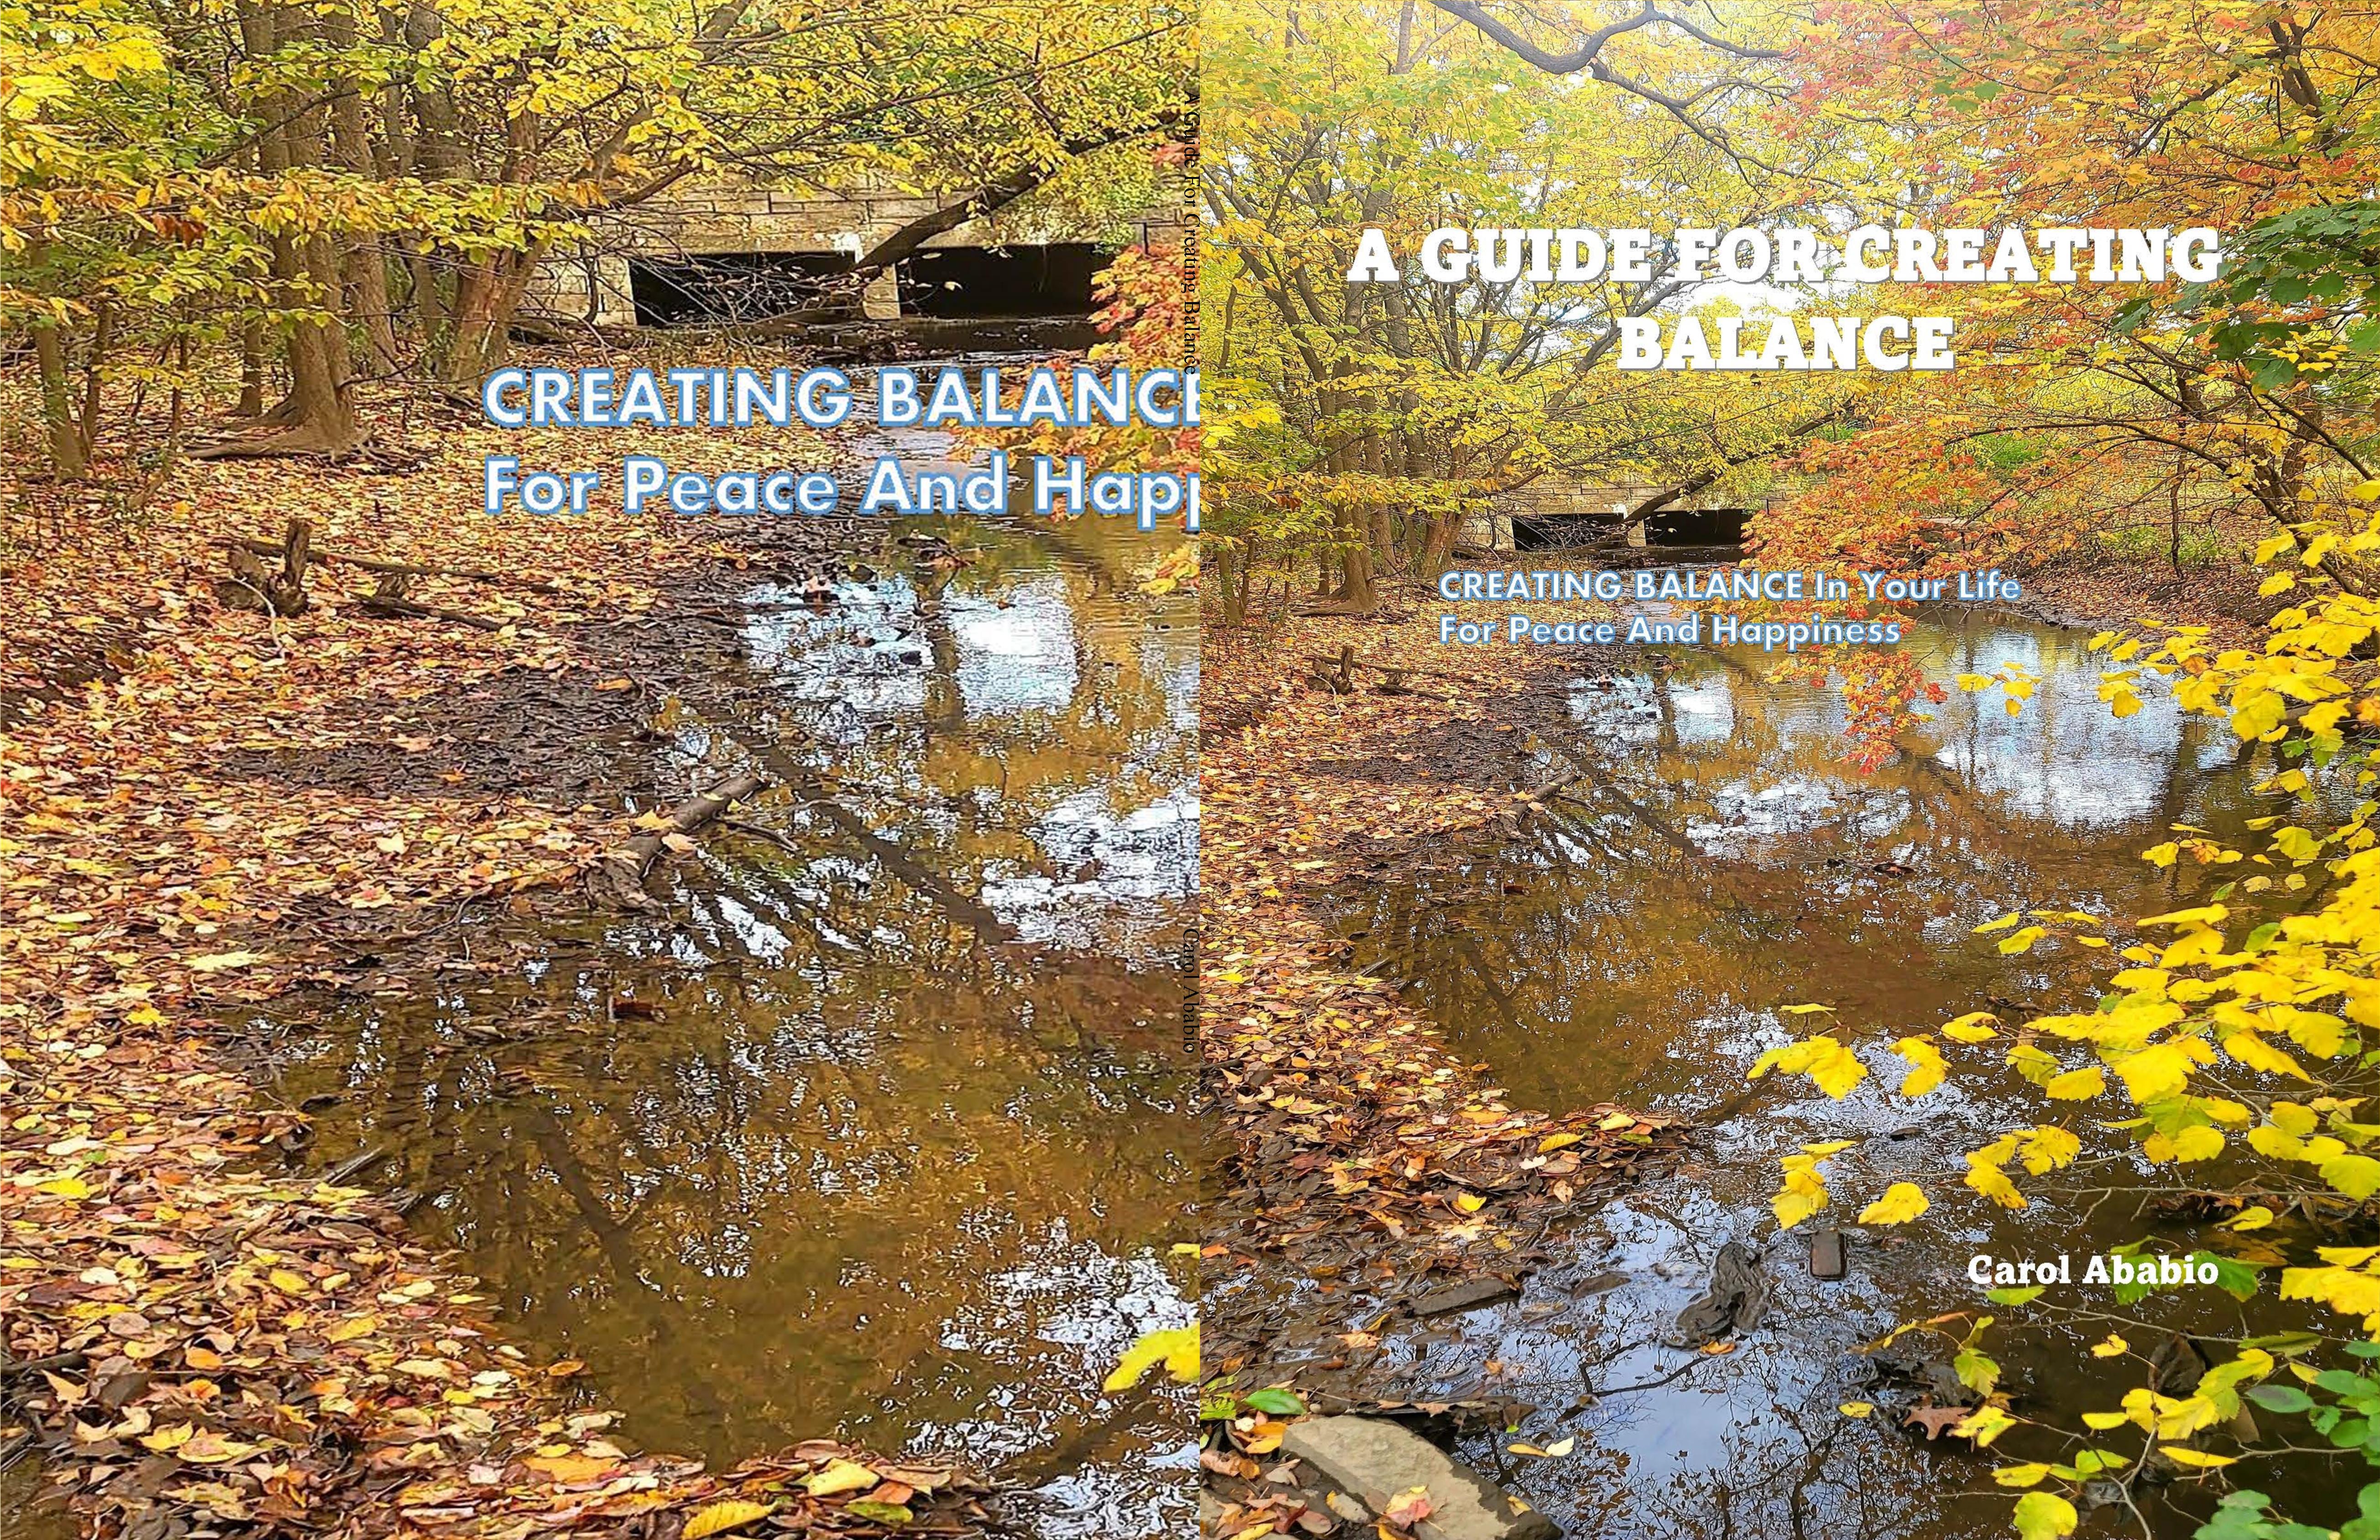 A Guide For Creating Balance cover image